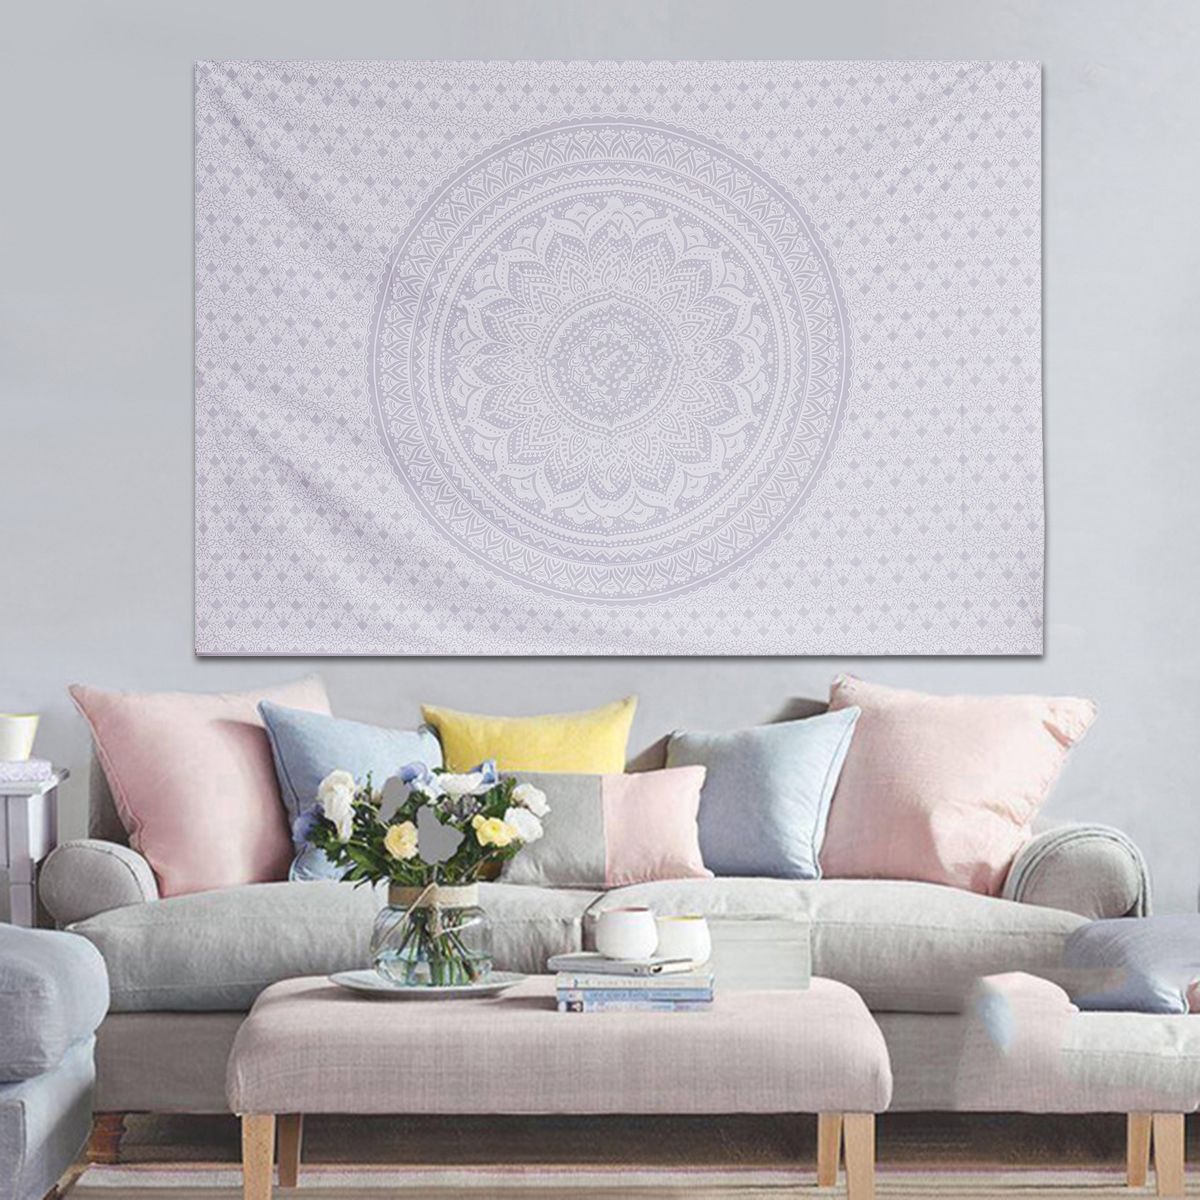 Indian-Mandala-Tapestry-Bohemian-Hippie-Wall-Hanging-Decor-Queen-Bedspread-Throw-1522841